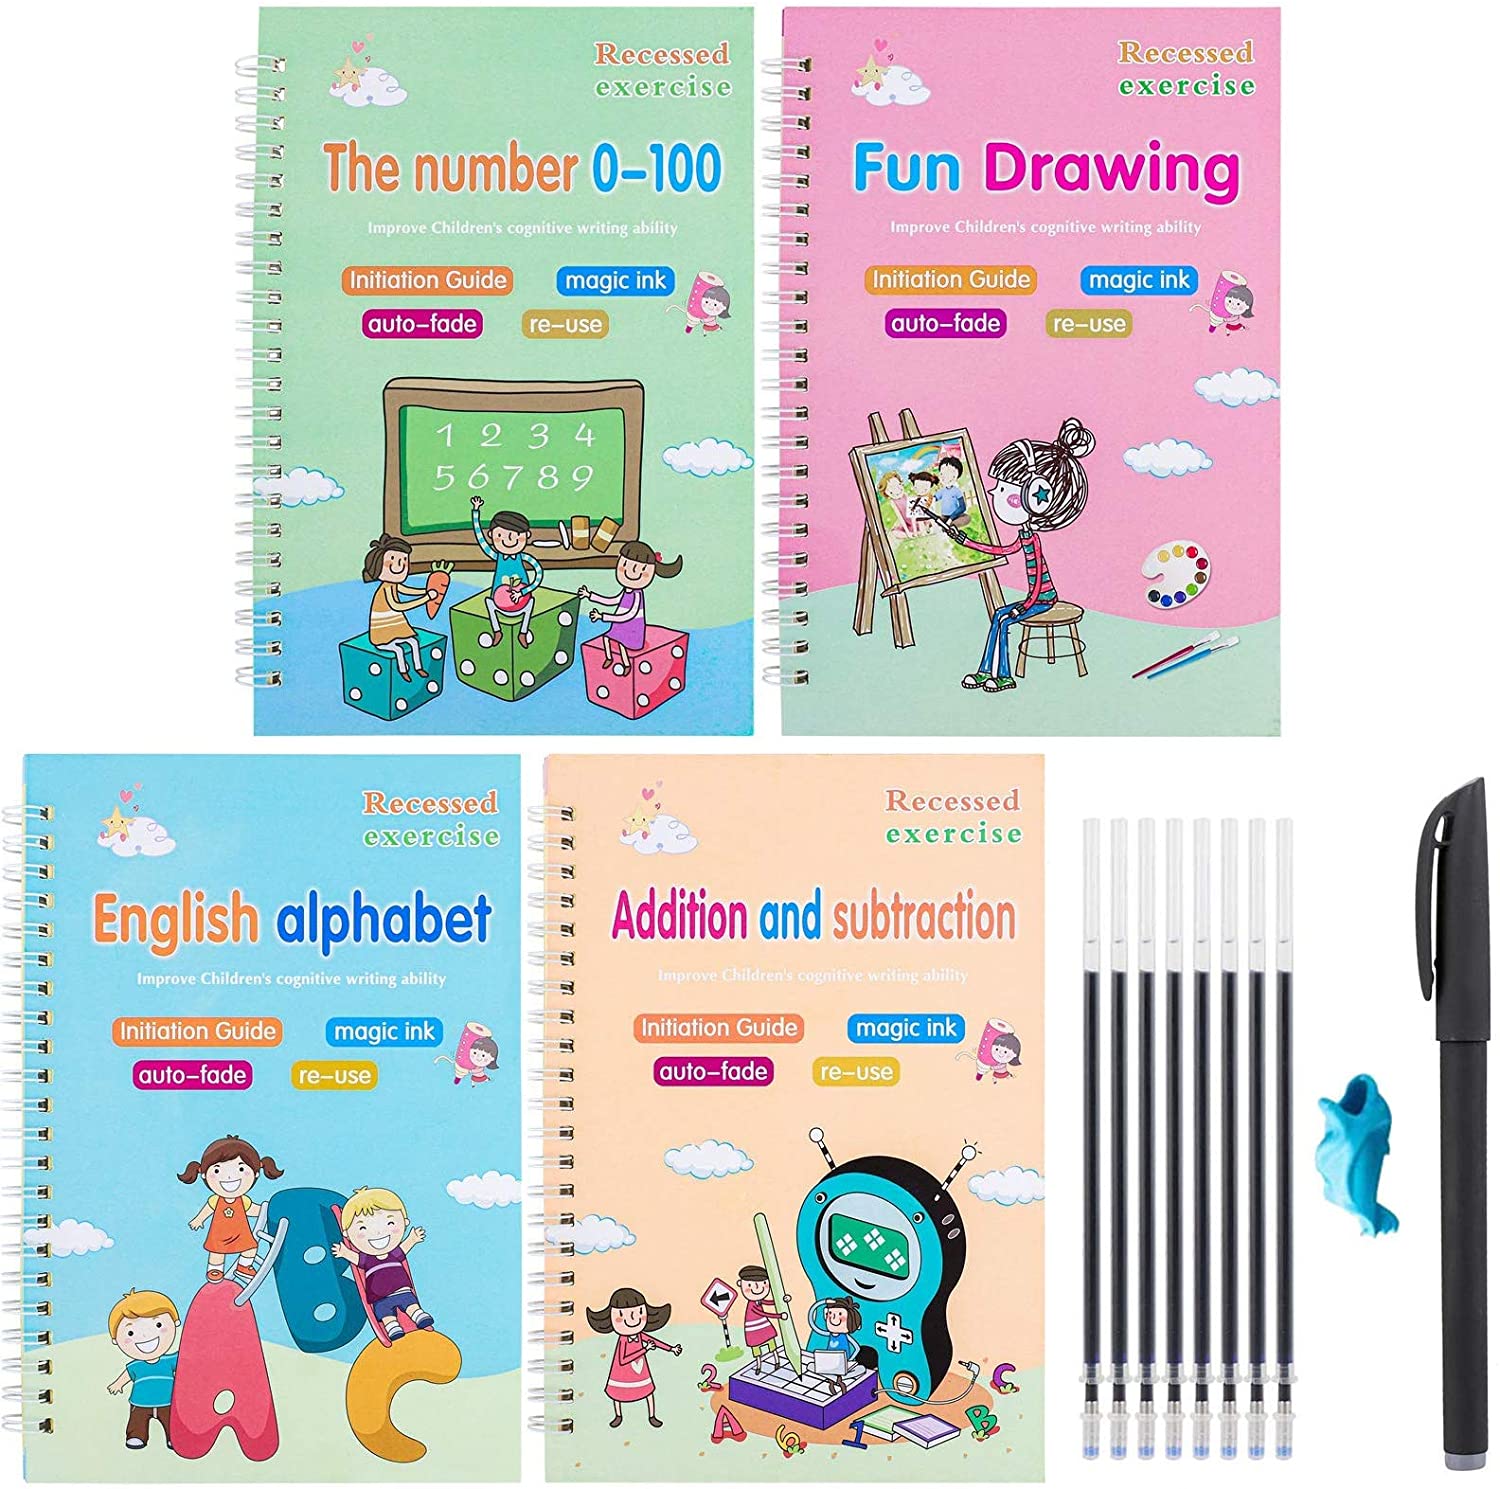 4pc Magic Practice Copybook for Kids for $7.99(60% off)